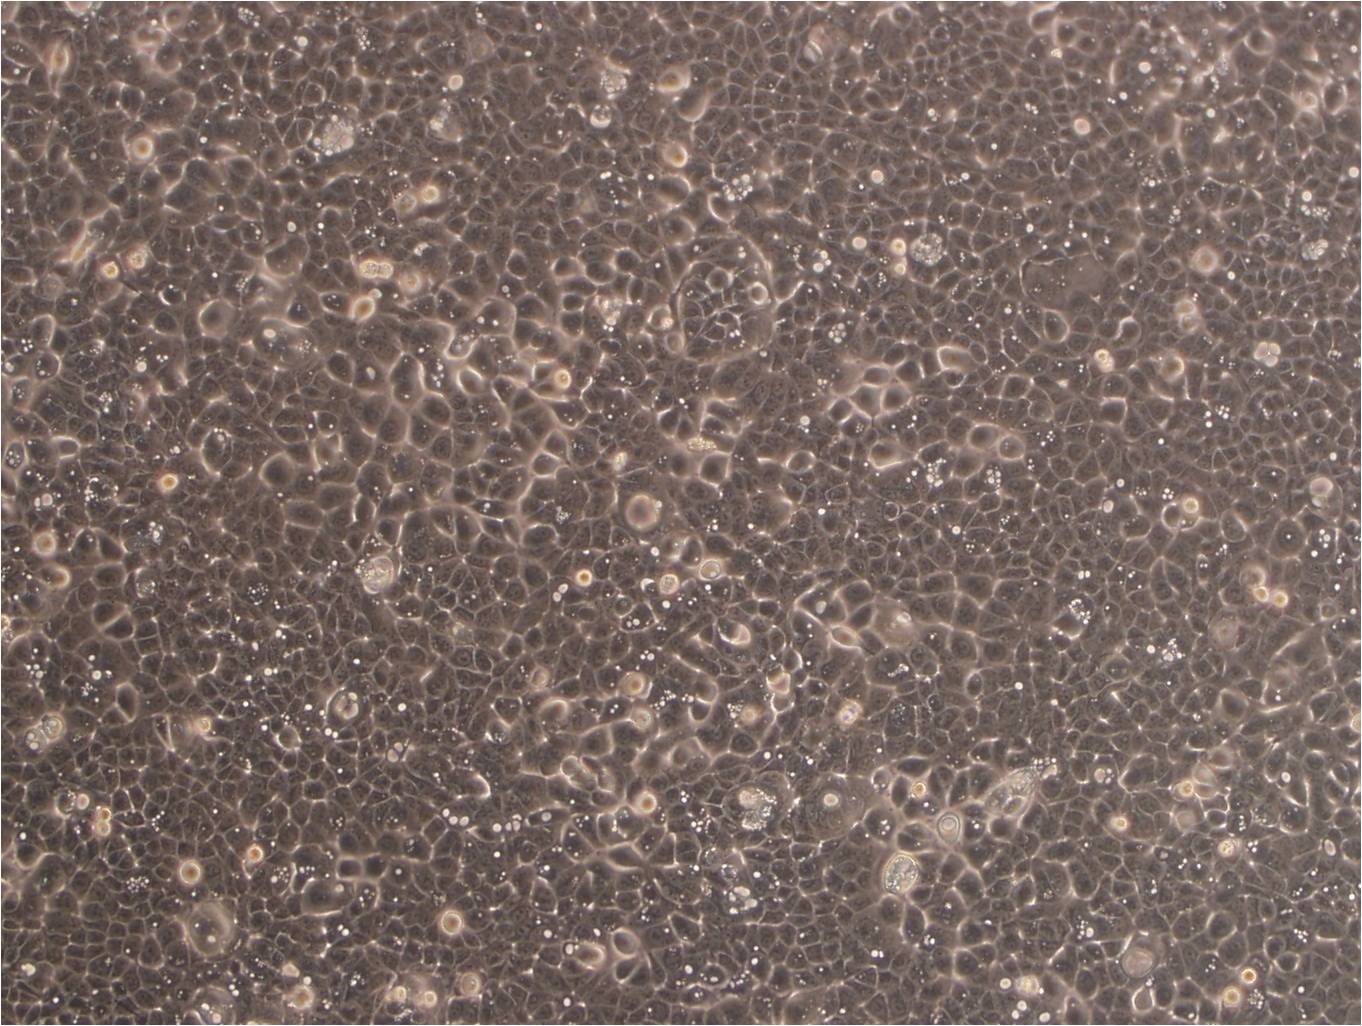 HSC-5 [Human skin squamous cell carcinoma] Cell|人皮肤鳞癌细胞